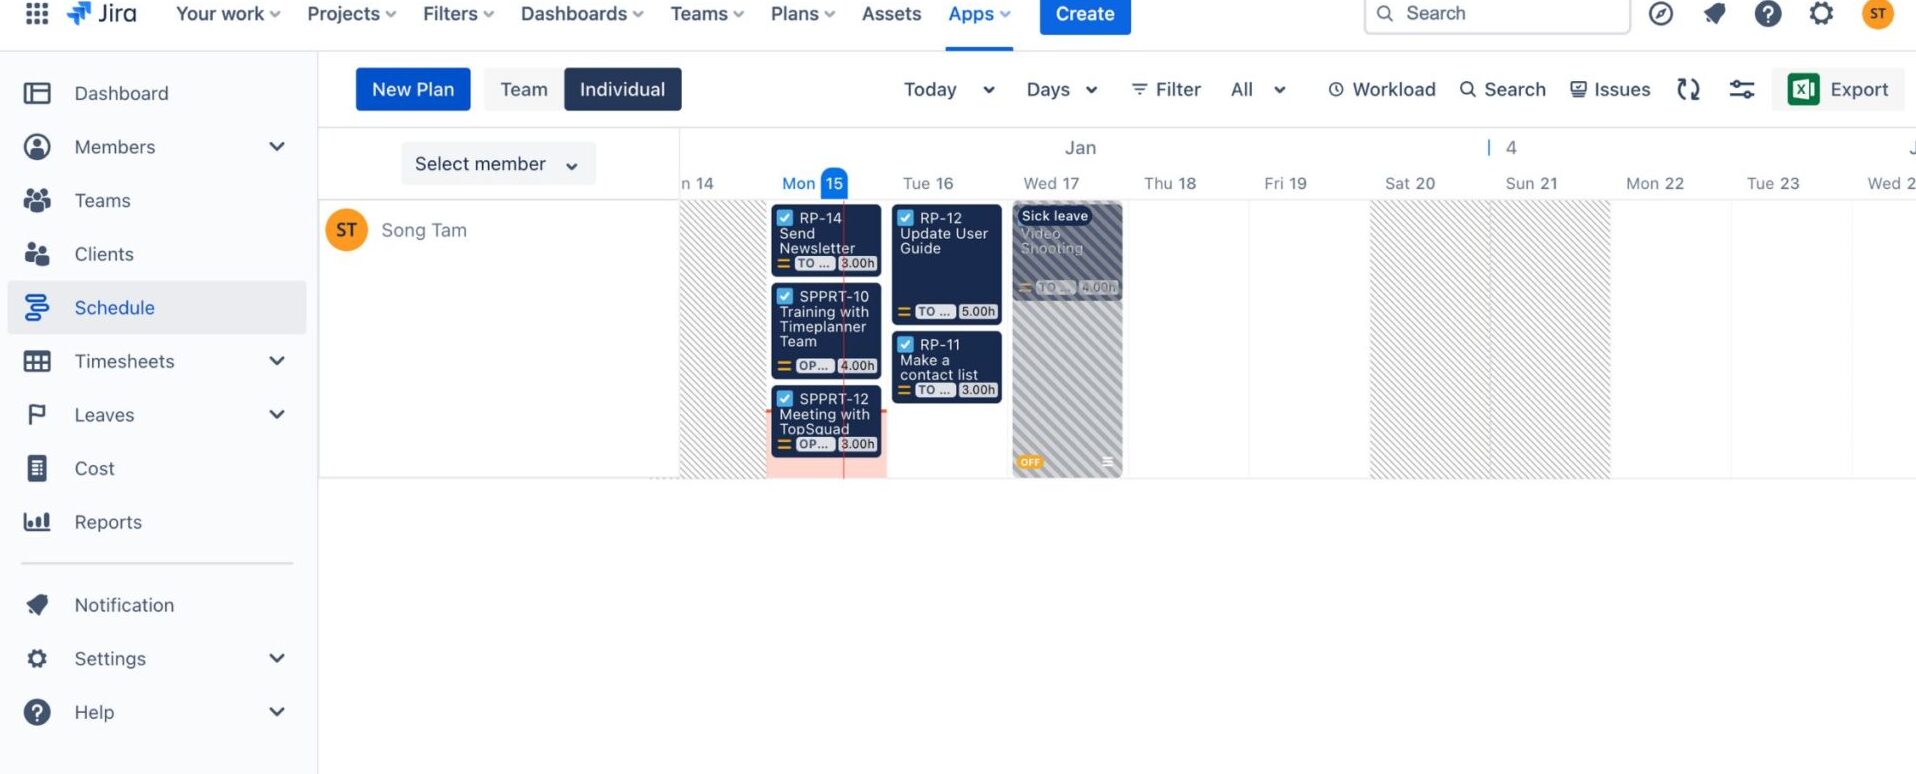 The Jira Time Tracking plugin will let you know when you are overloaded with tasks by highlighting your time capacity